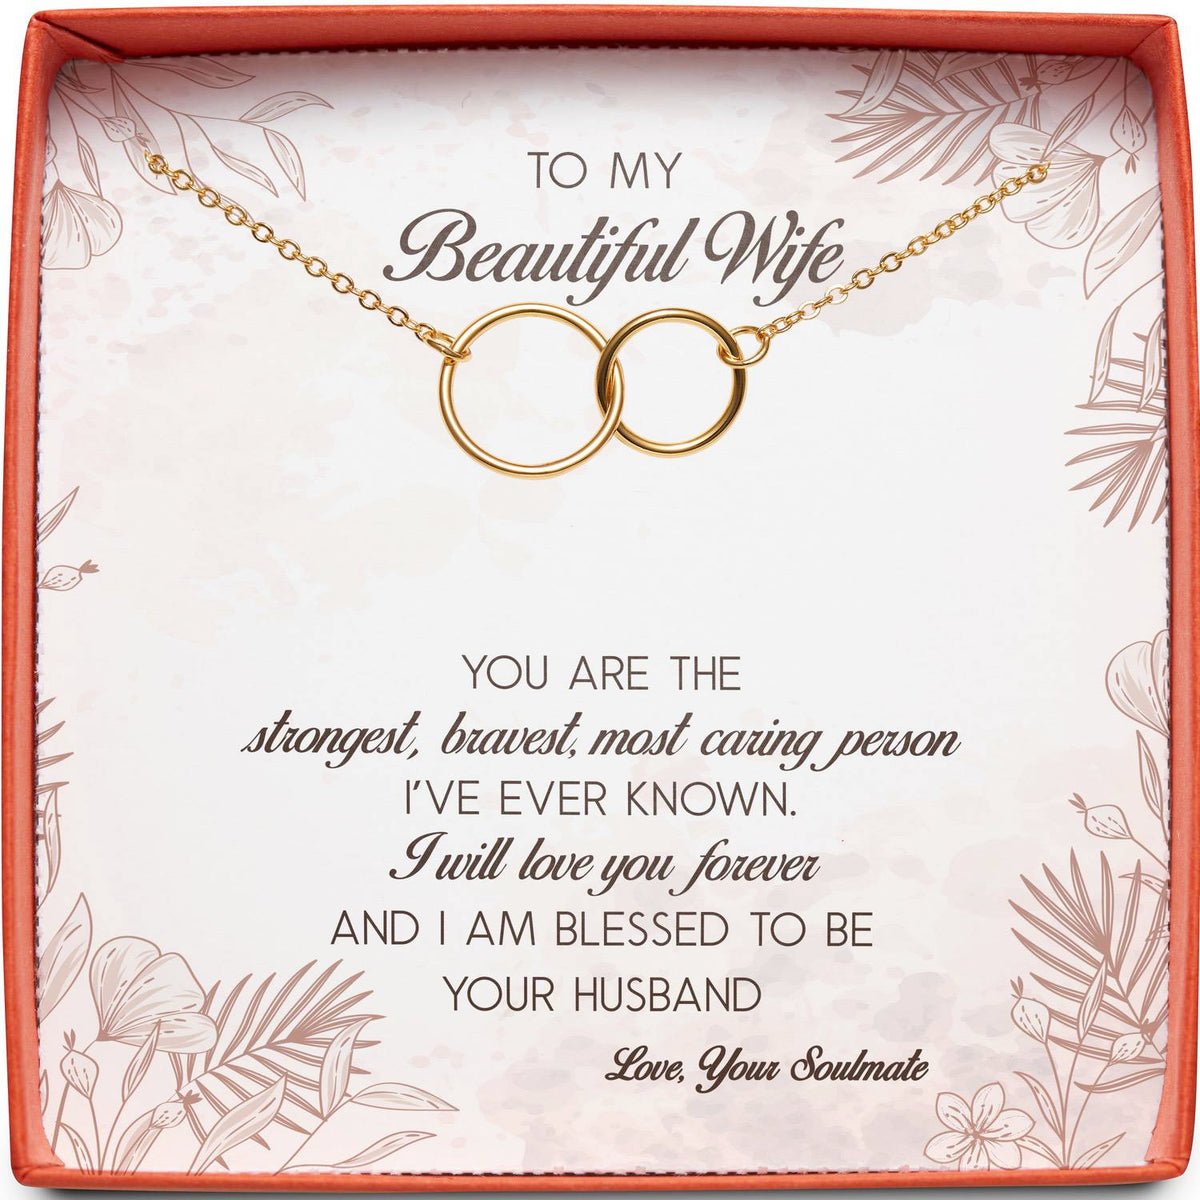 To My Beautiful Wife | Strongest, Bravest, Most Caring | Interlocking Circles